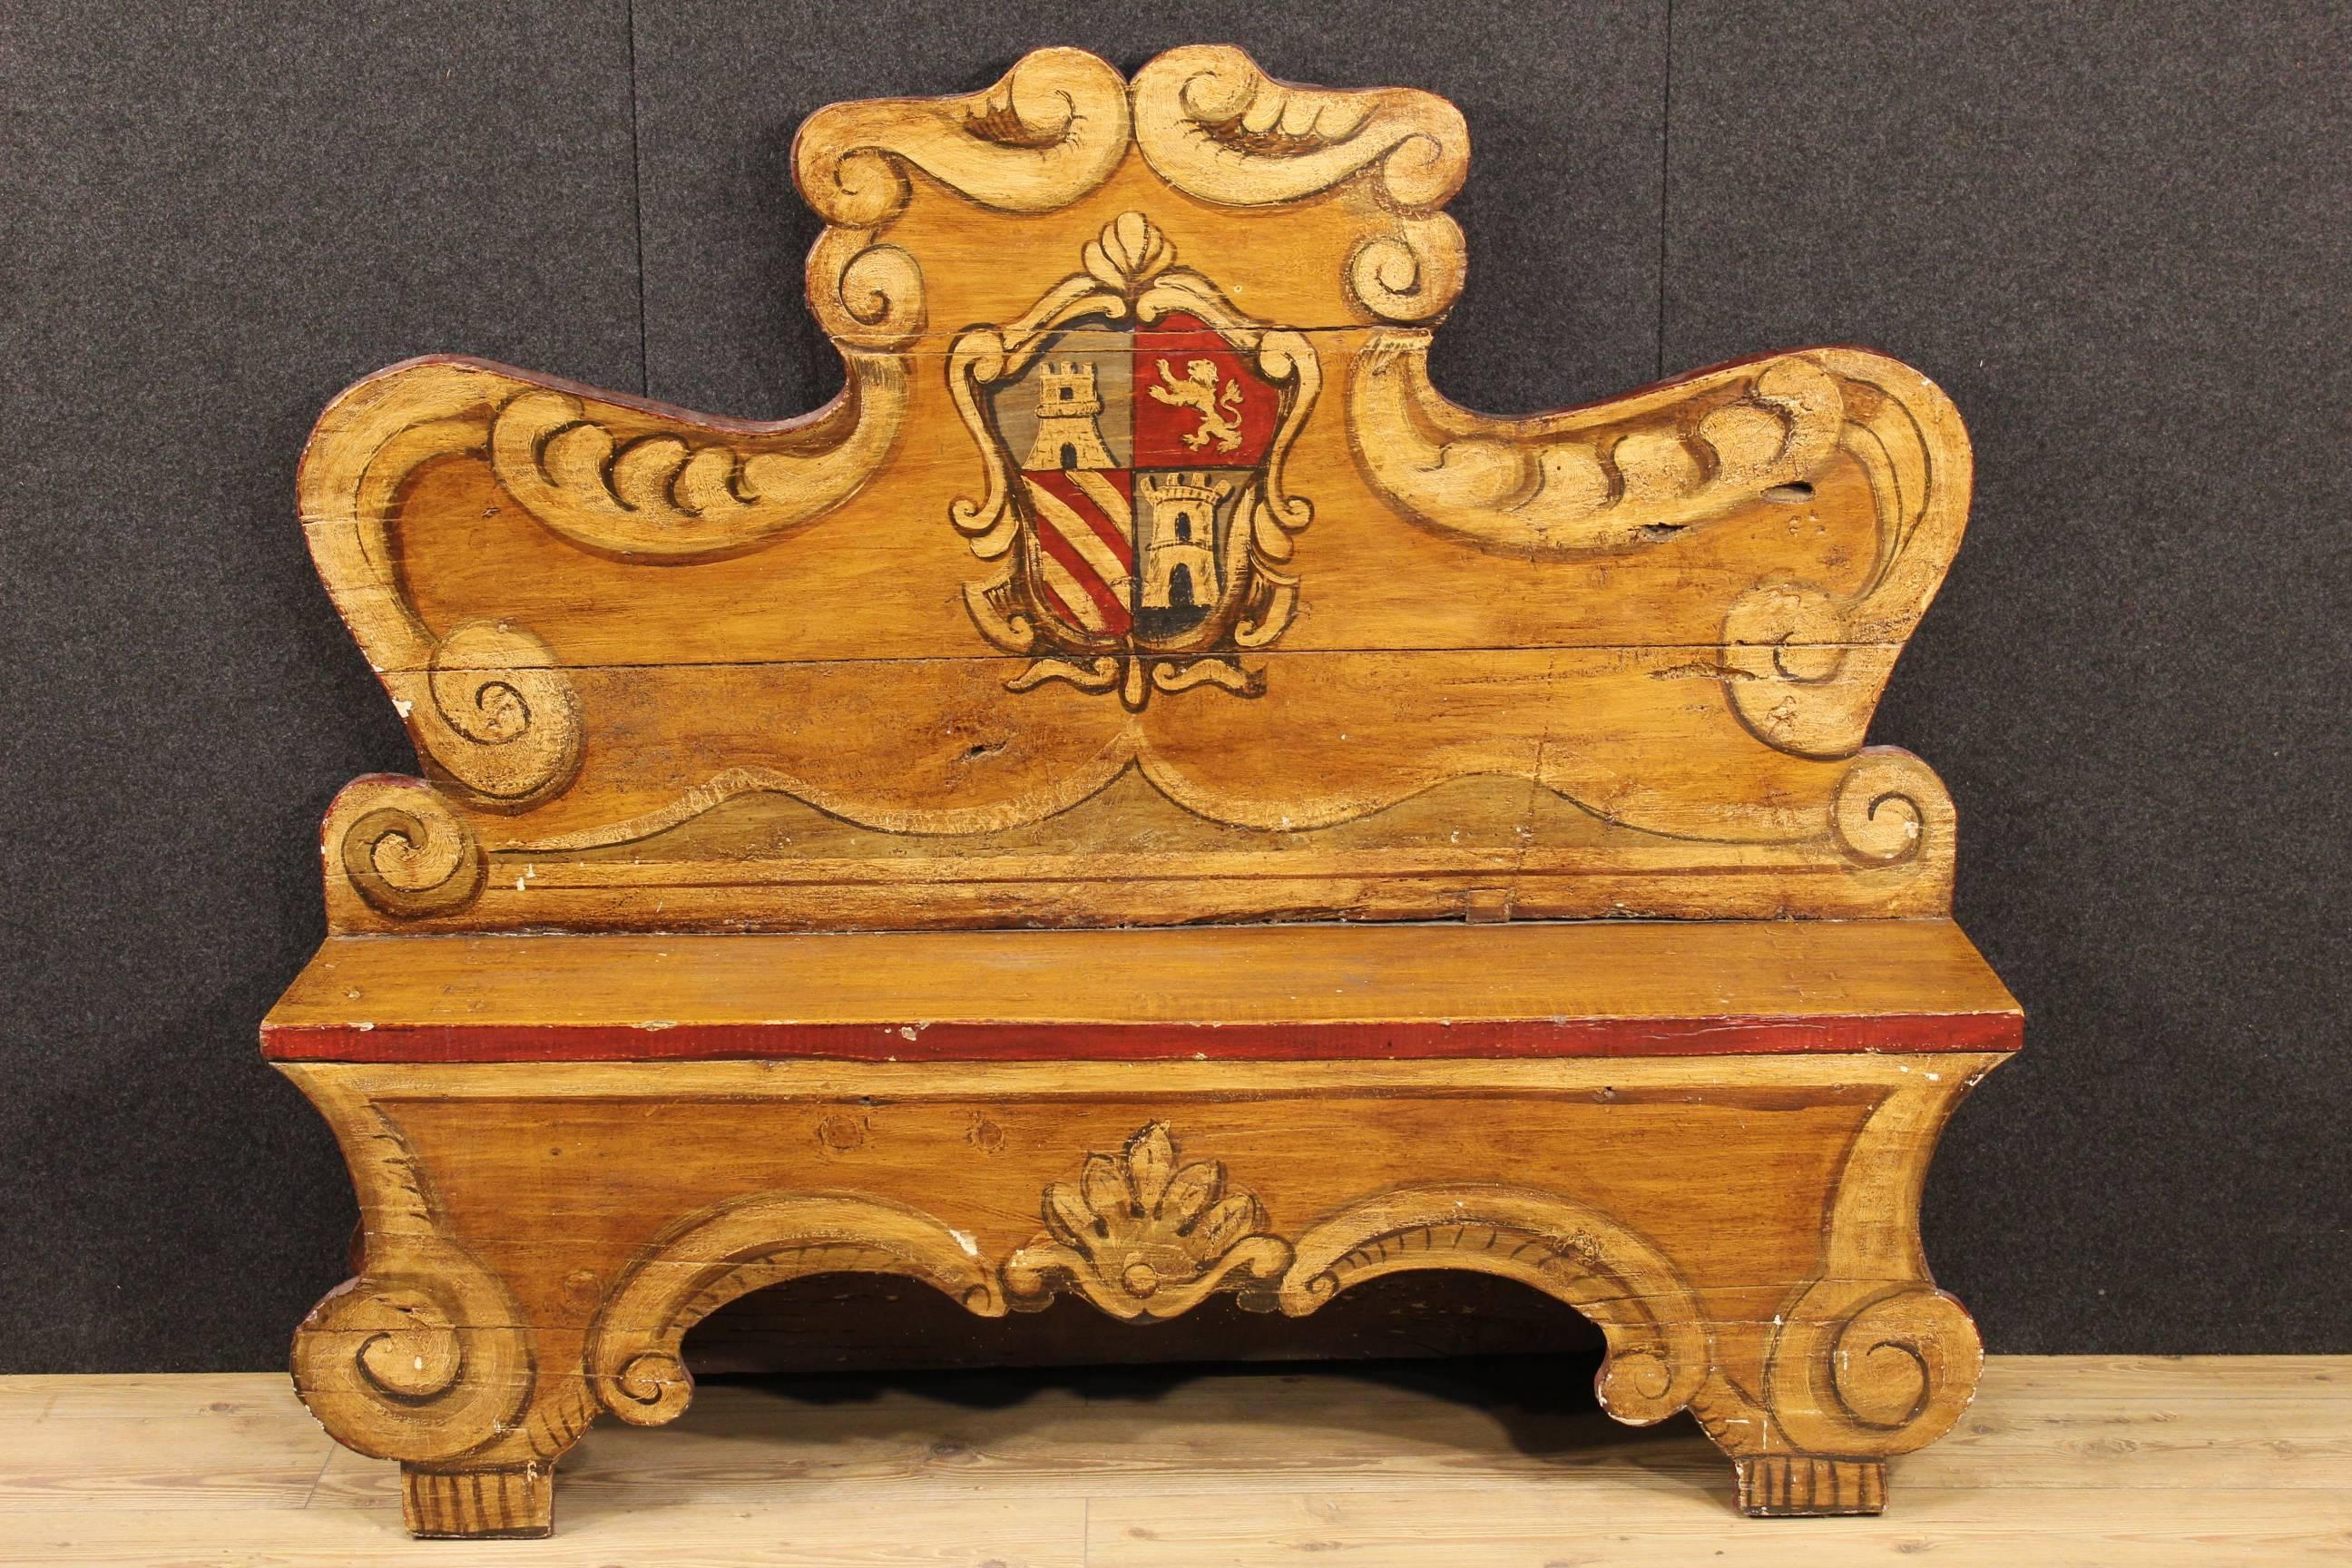 Venetian bench from the 20th century. Furniture made by carved, lacquered and painted wood decorated with a coat of arms. Seat height of 46 cm. It presents some signs of the time and drops of lacquer, on the whole in good conditions.